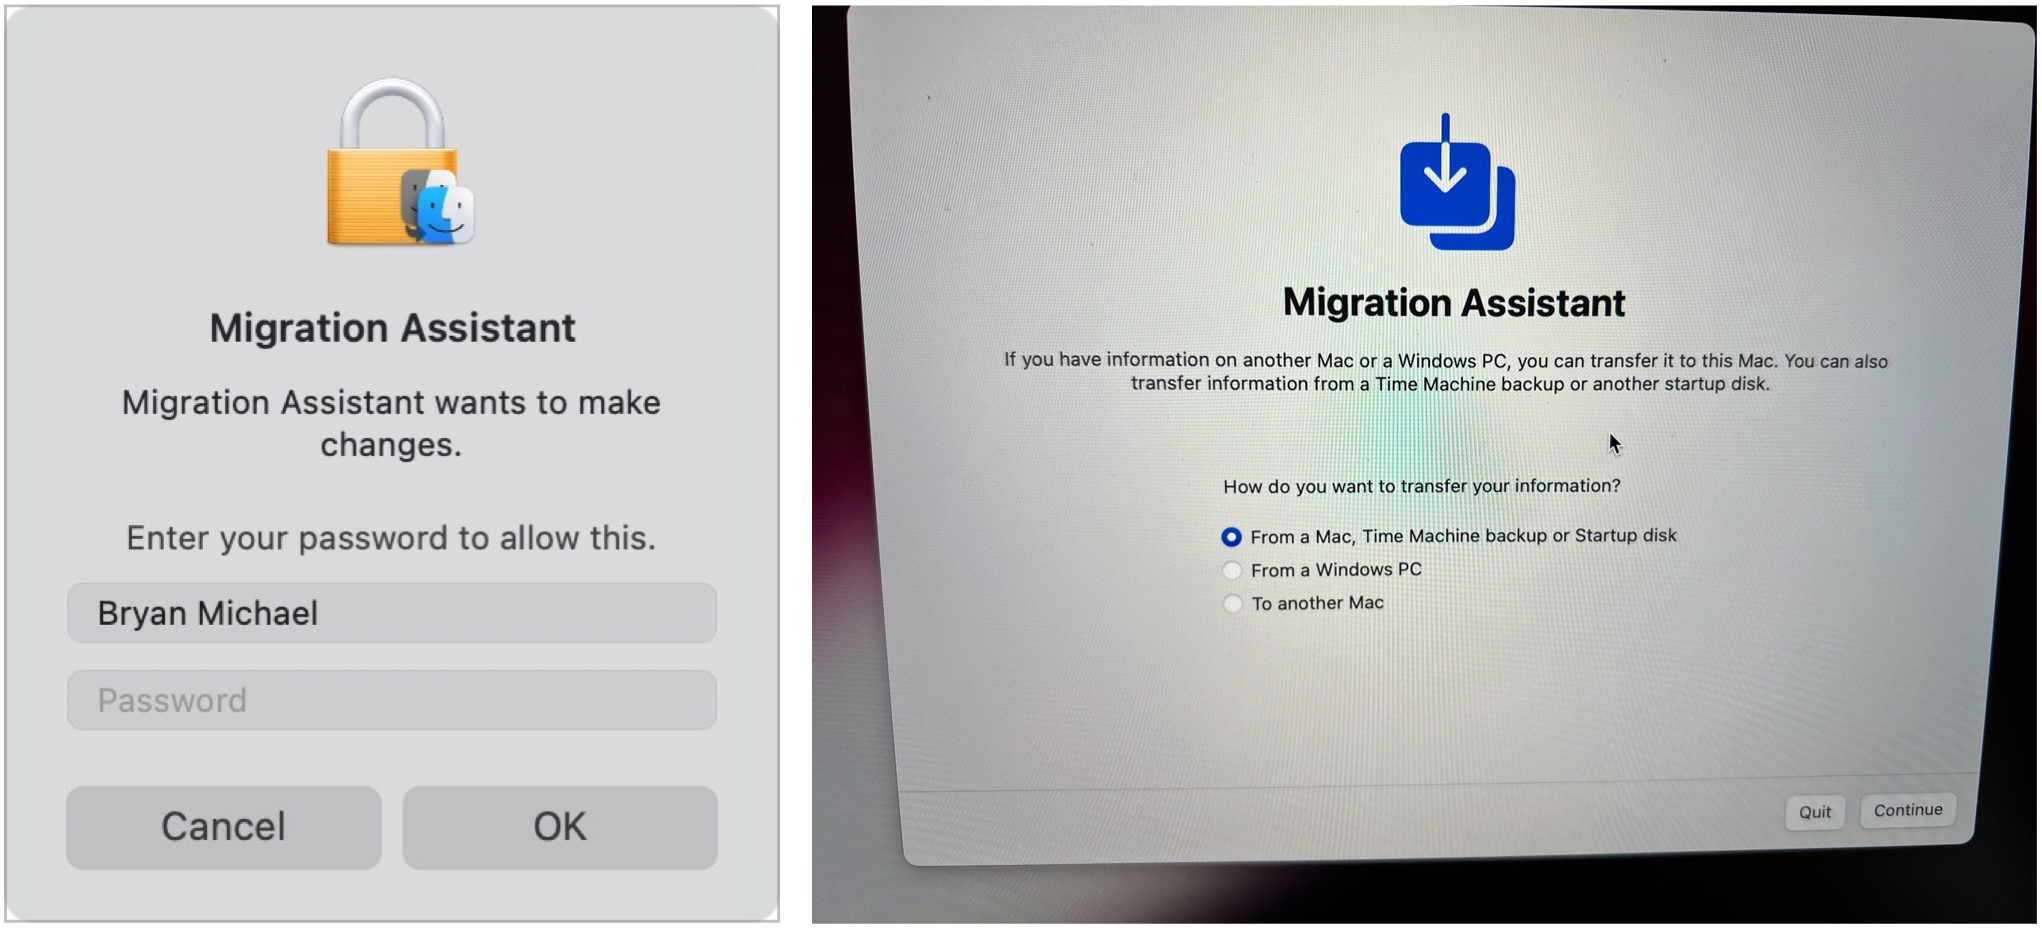 To transfer data to new Mac using Migration Assistant, click Continue then log into your Mac account. Select how you want to transfer your information, then click Continue.